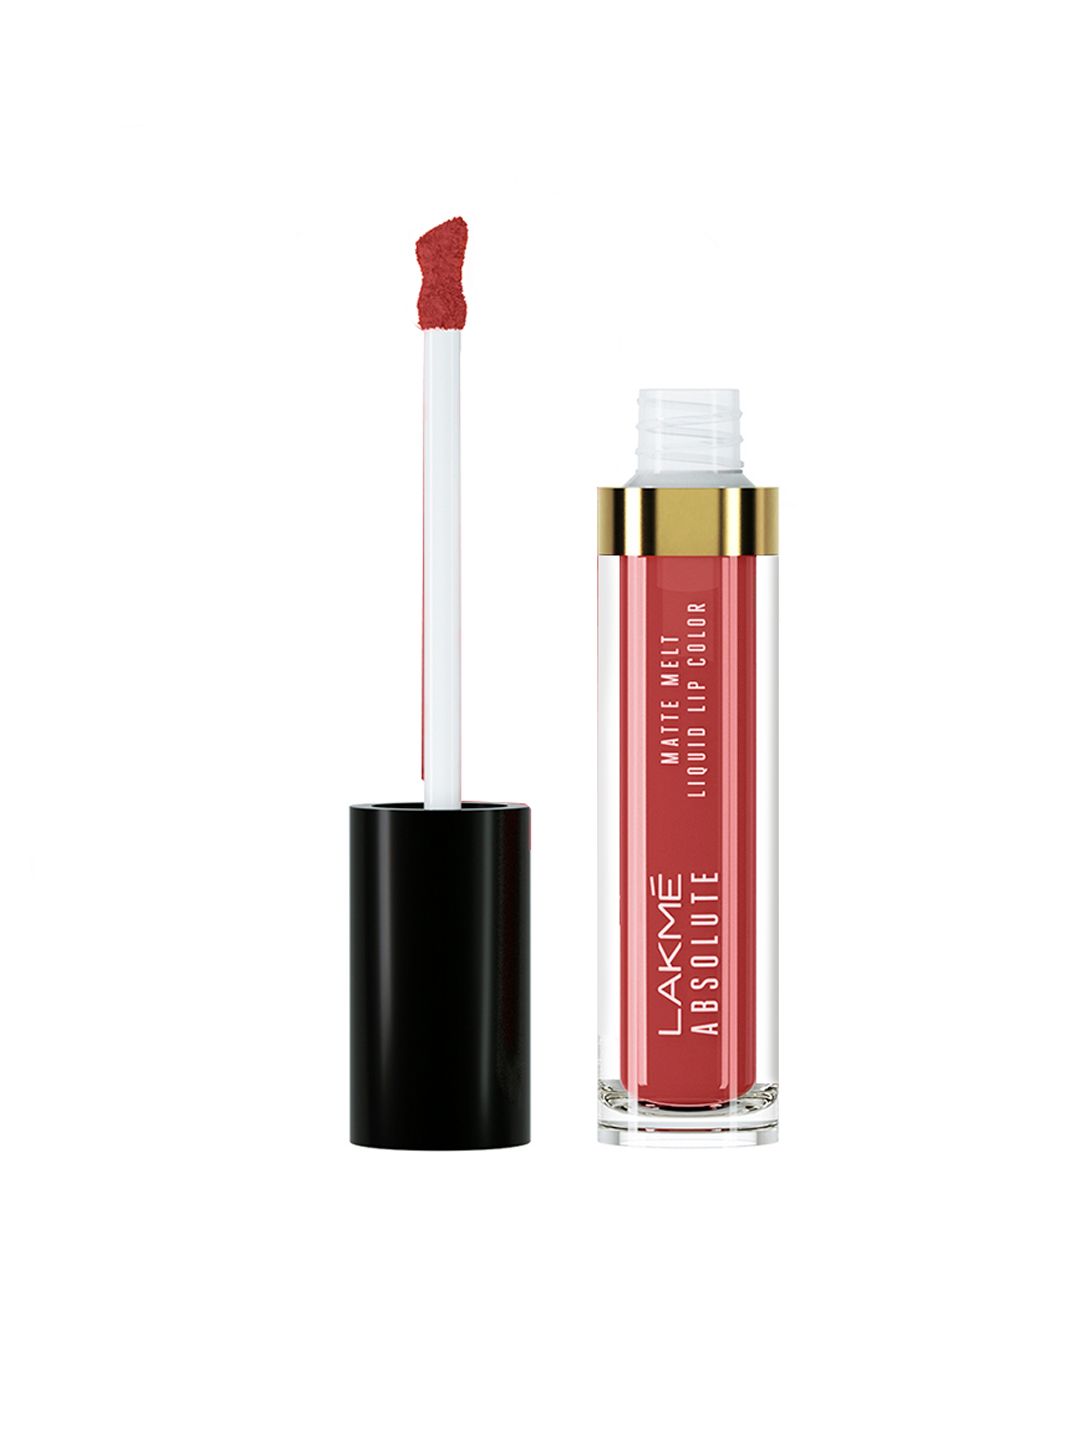 Lakme Absolute Matte Melt Liquid Lip Color - Coral Reef 430 Price in India